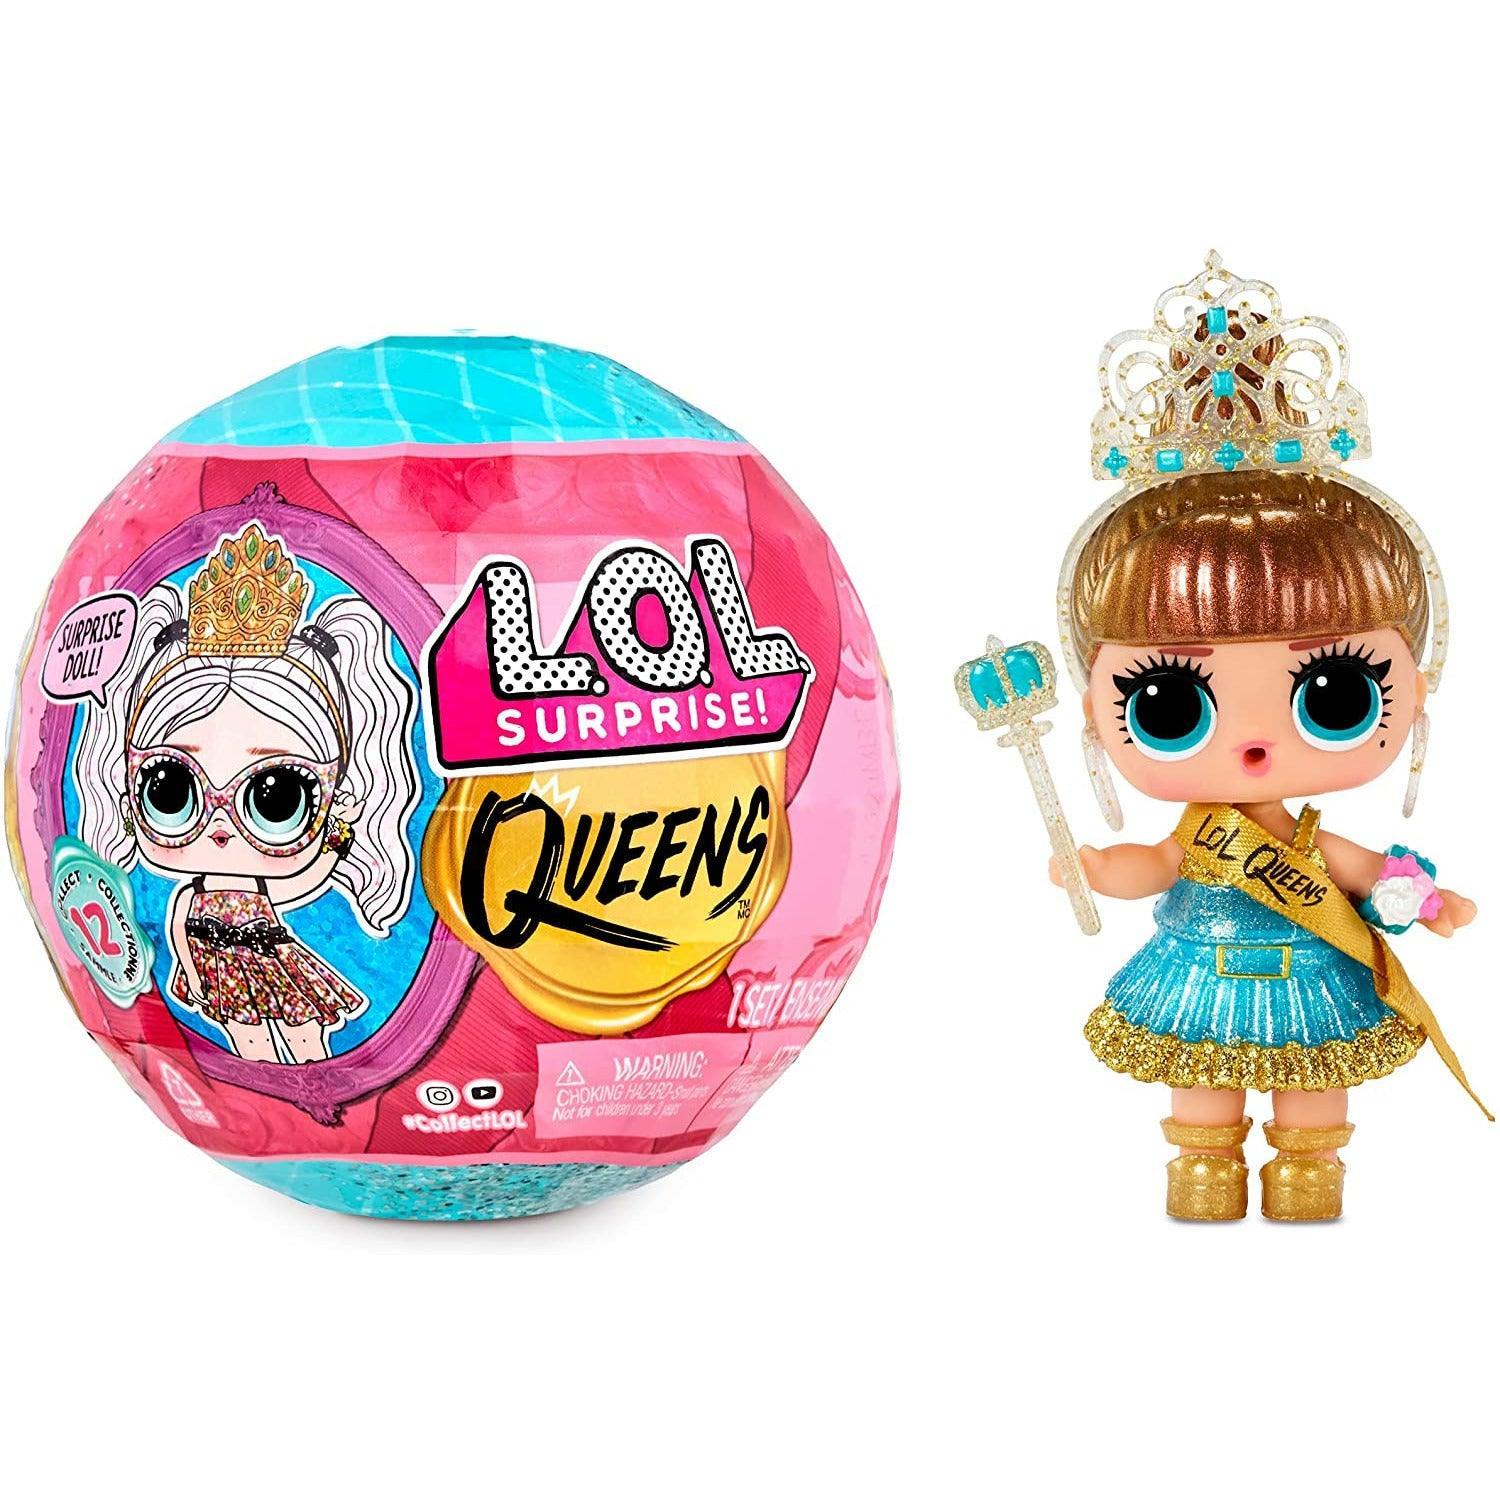 LOL Surprise OMG Queens Dolls with 9 Surprises Including Doll, Fashions, and Royal Themed Accessories - BumbleToys - 5-7 Years, Dolls, Fashion Dolls & Accessories, Girls, L.O.L, OXE, Pre-Order